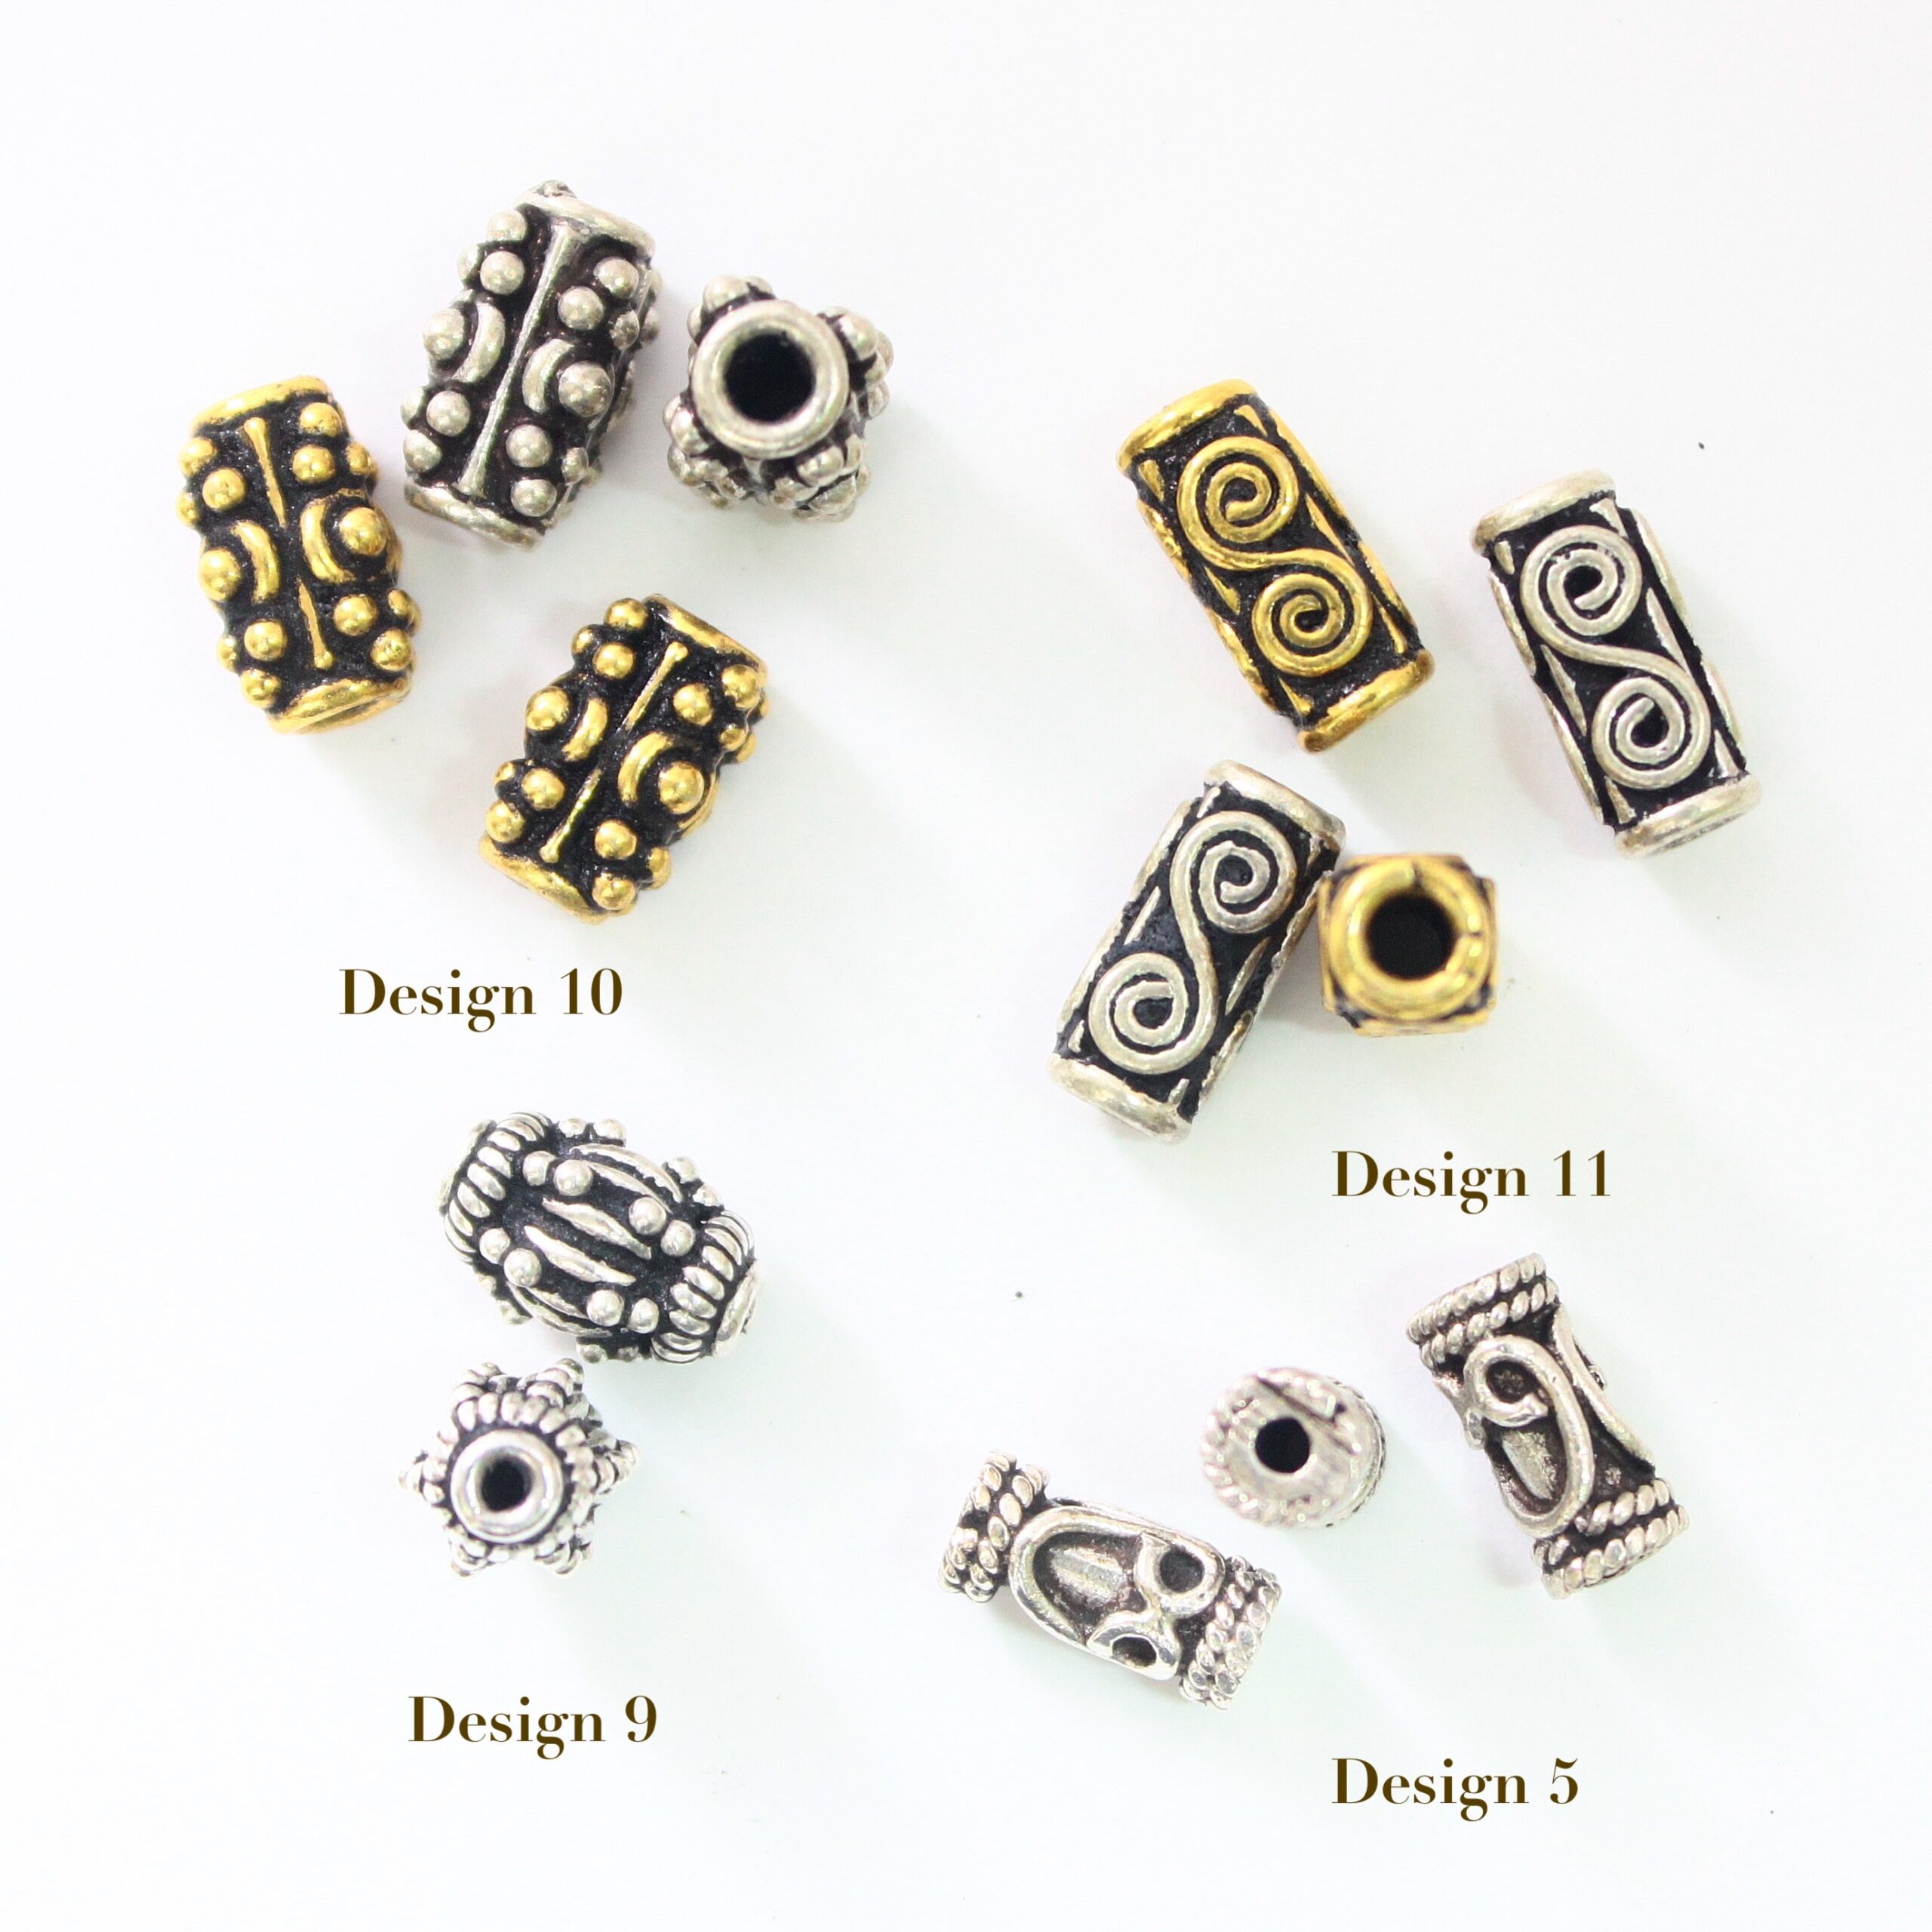 Bali Design Manufacturer Of Sterling Silver Bali Jewelry Beads